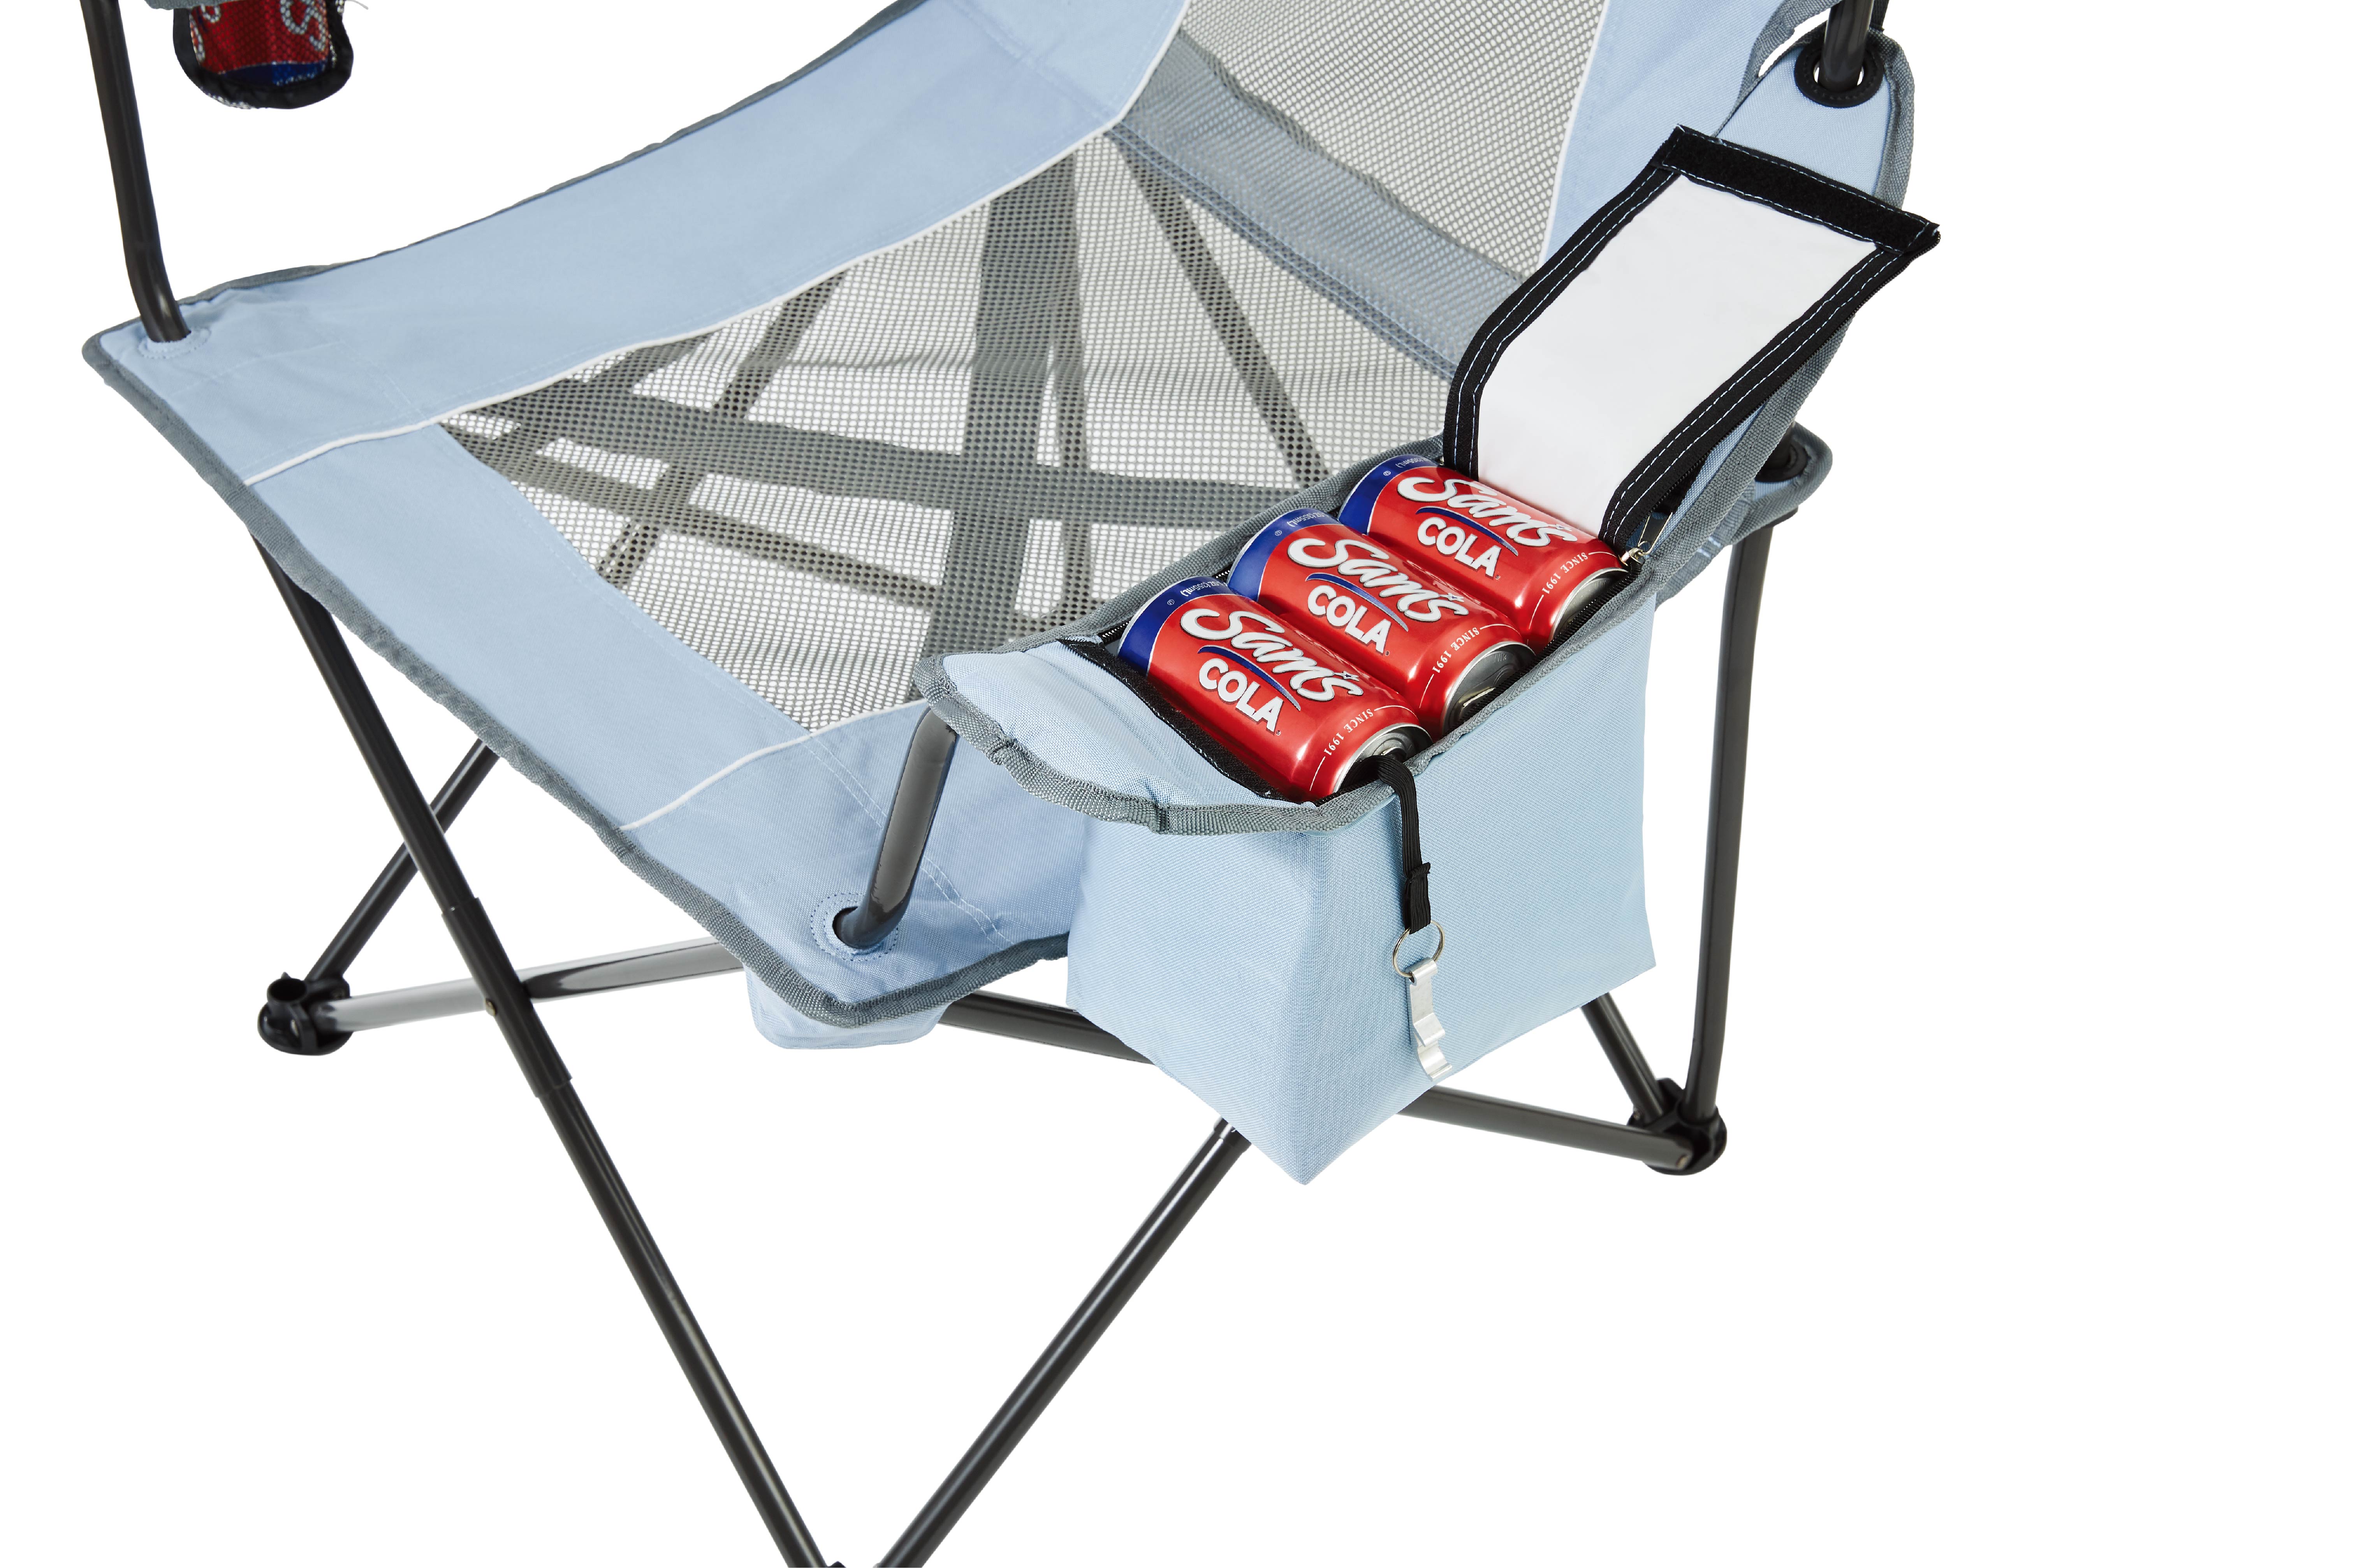 Ozark Trail Oversized Mesh Camp Chair with Cooler, Blue/Aqua and Grey, Adult - image 2 of 9